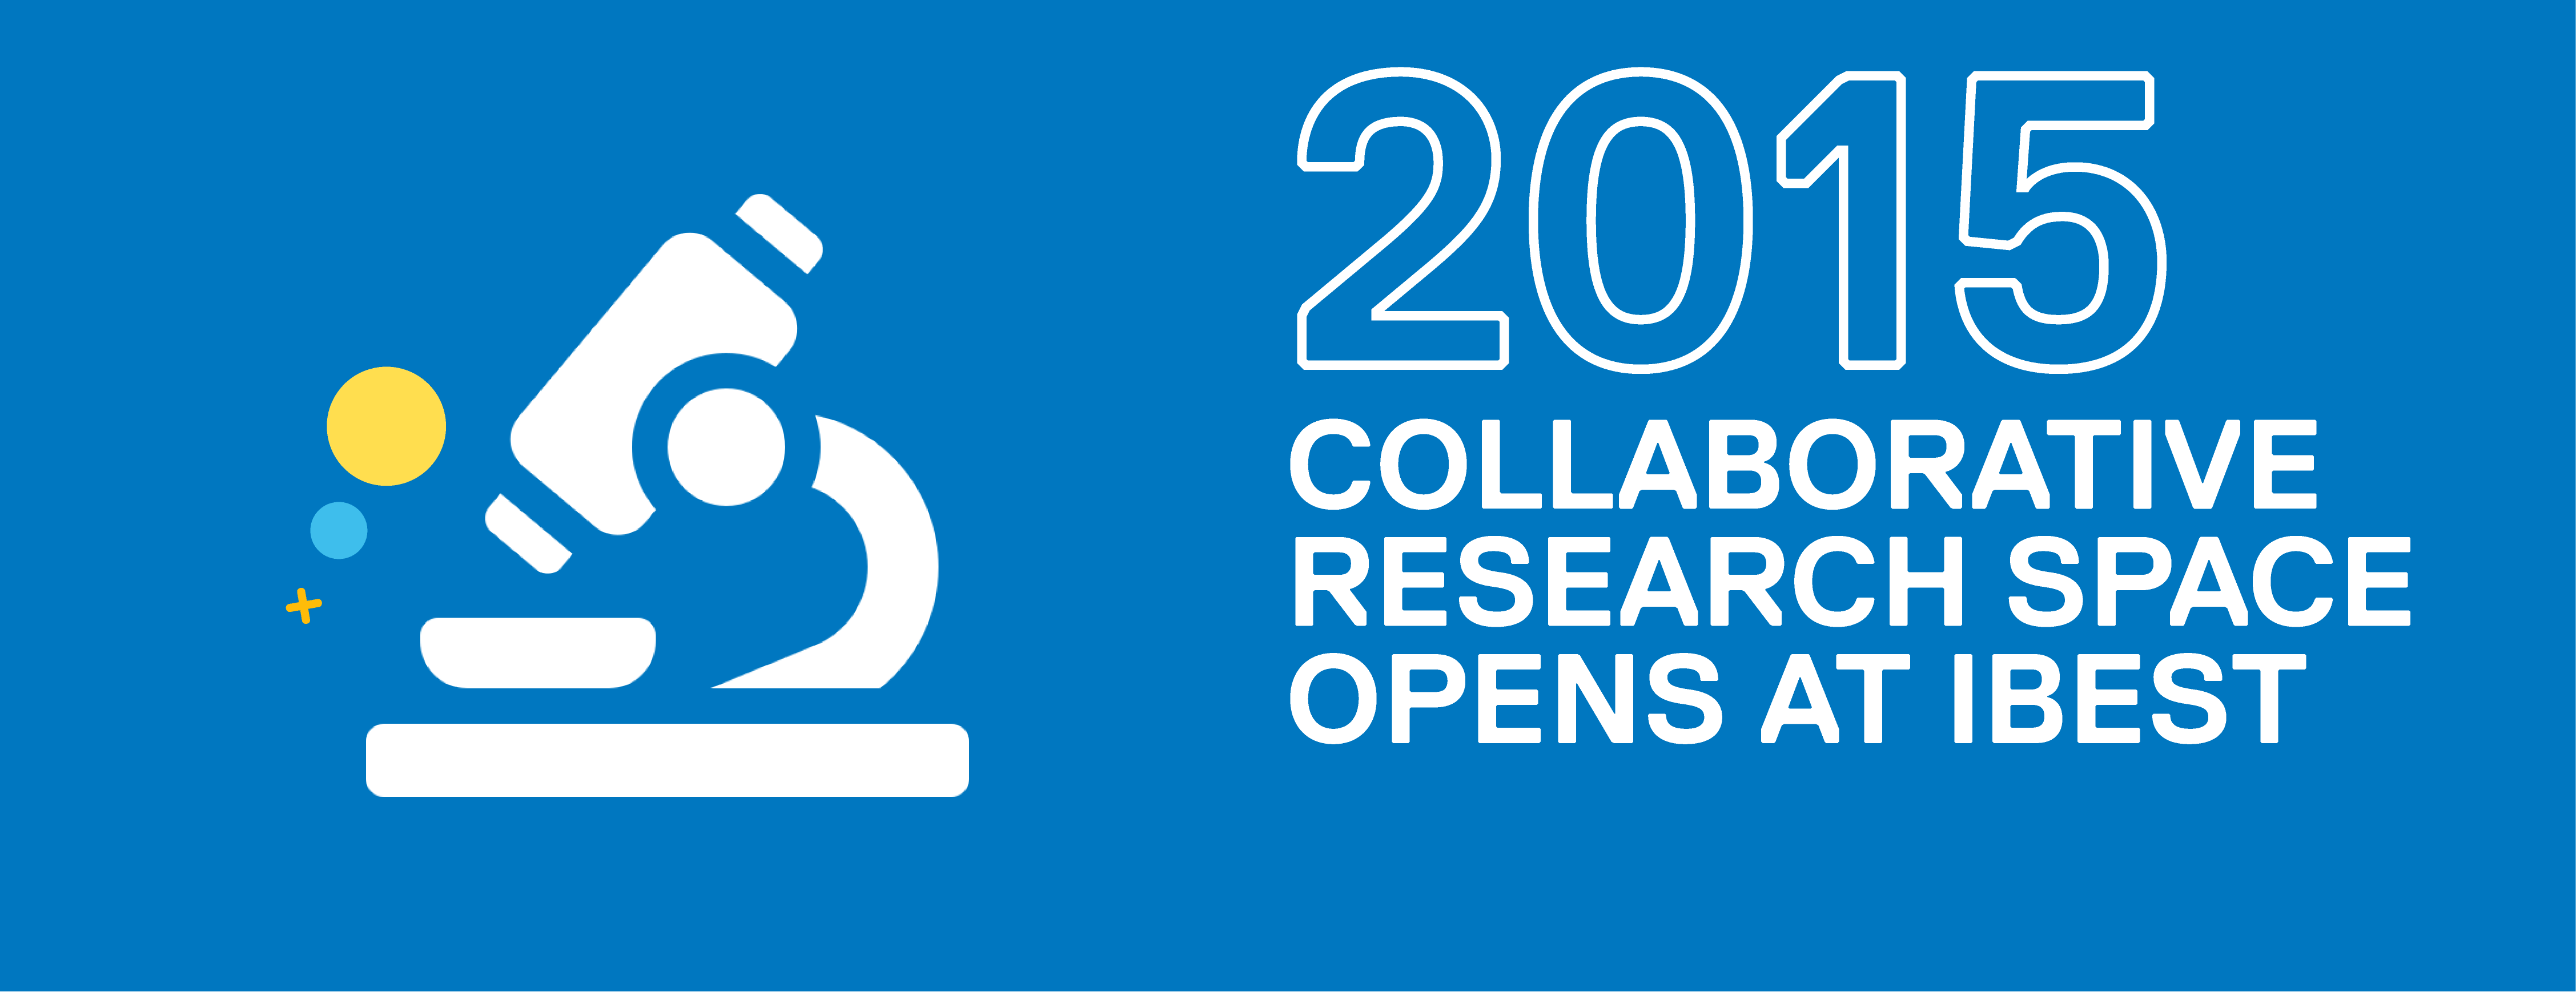 Two thousand fifteen collaborative research space opens at ibest